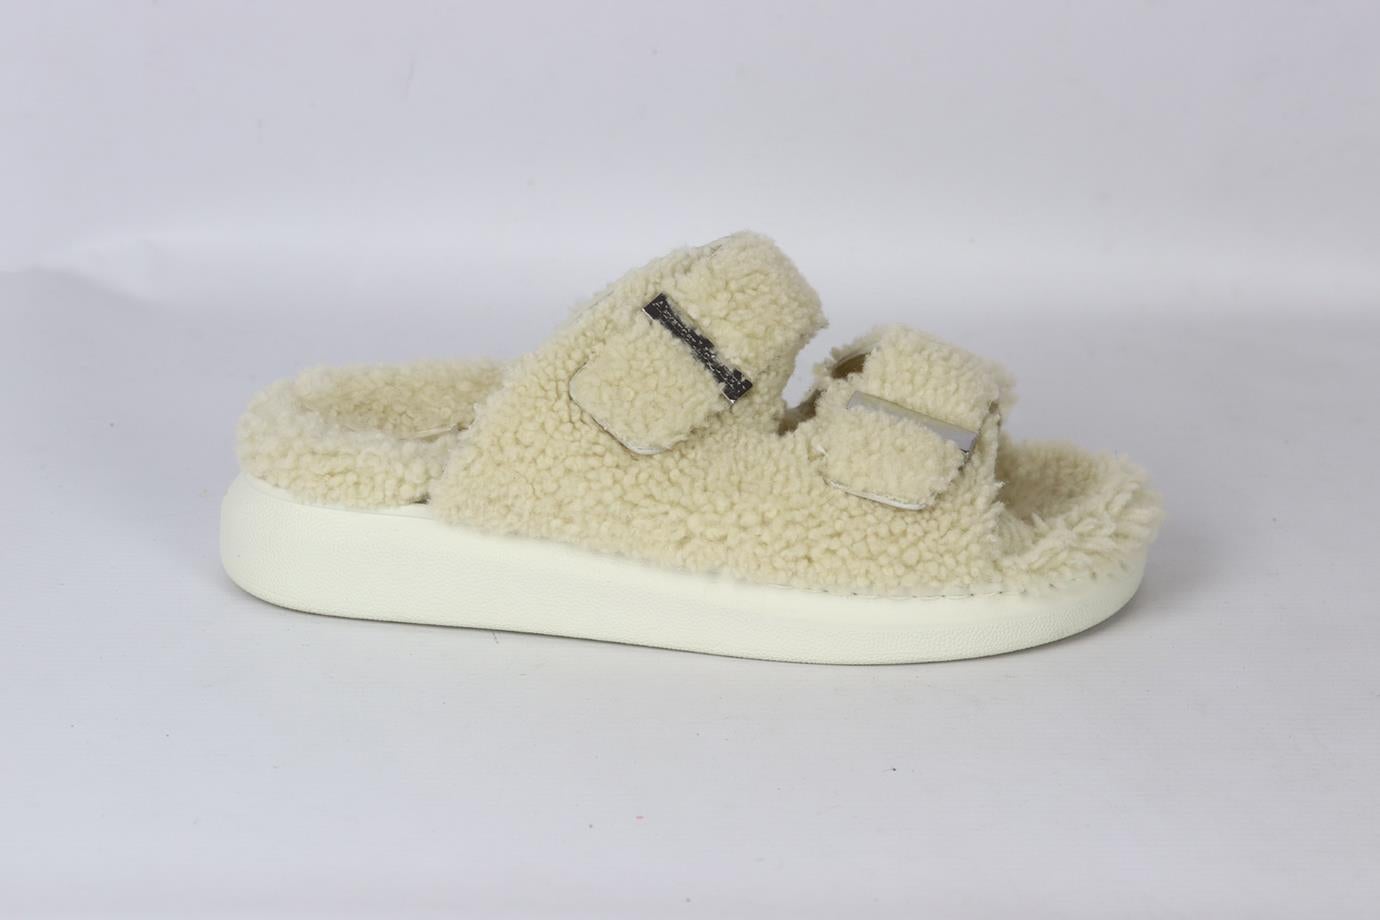 Alexander McQueen shearling platform slides. Cream. Slip on. Does not come with dustbag or box. Insole: 10.5 in. Platform: 2 in. Very good condition - Light wear to soles; see pictures